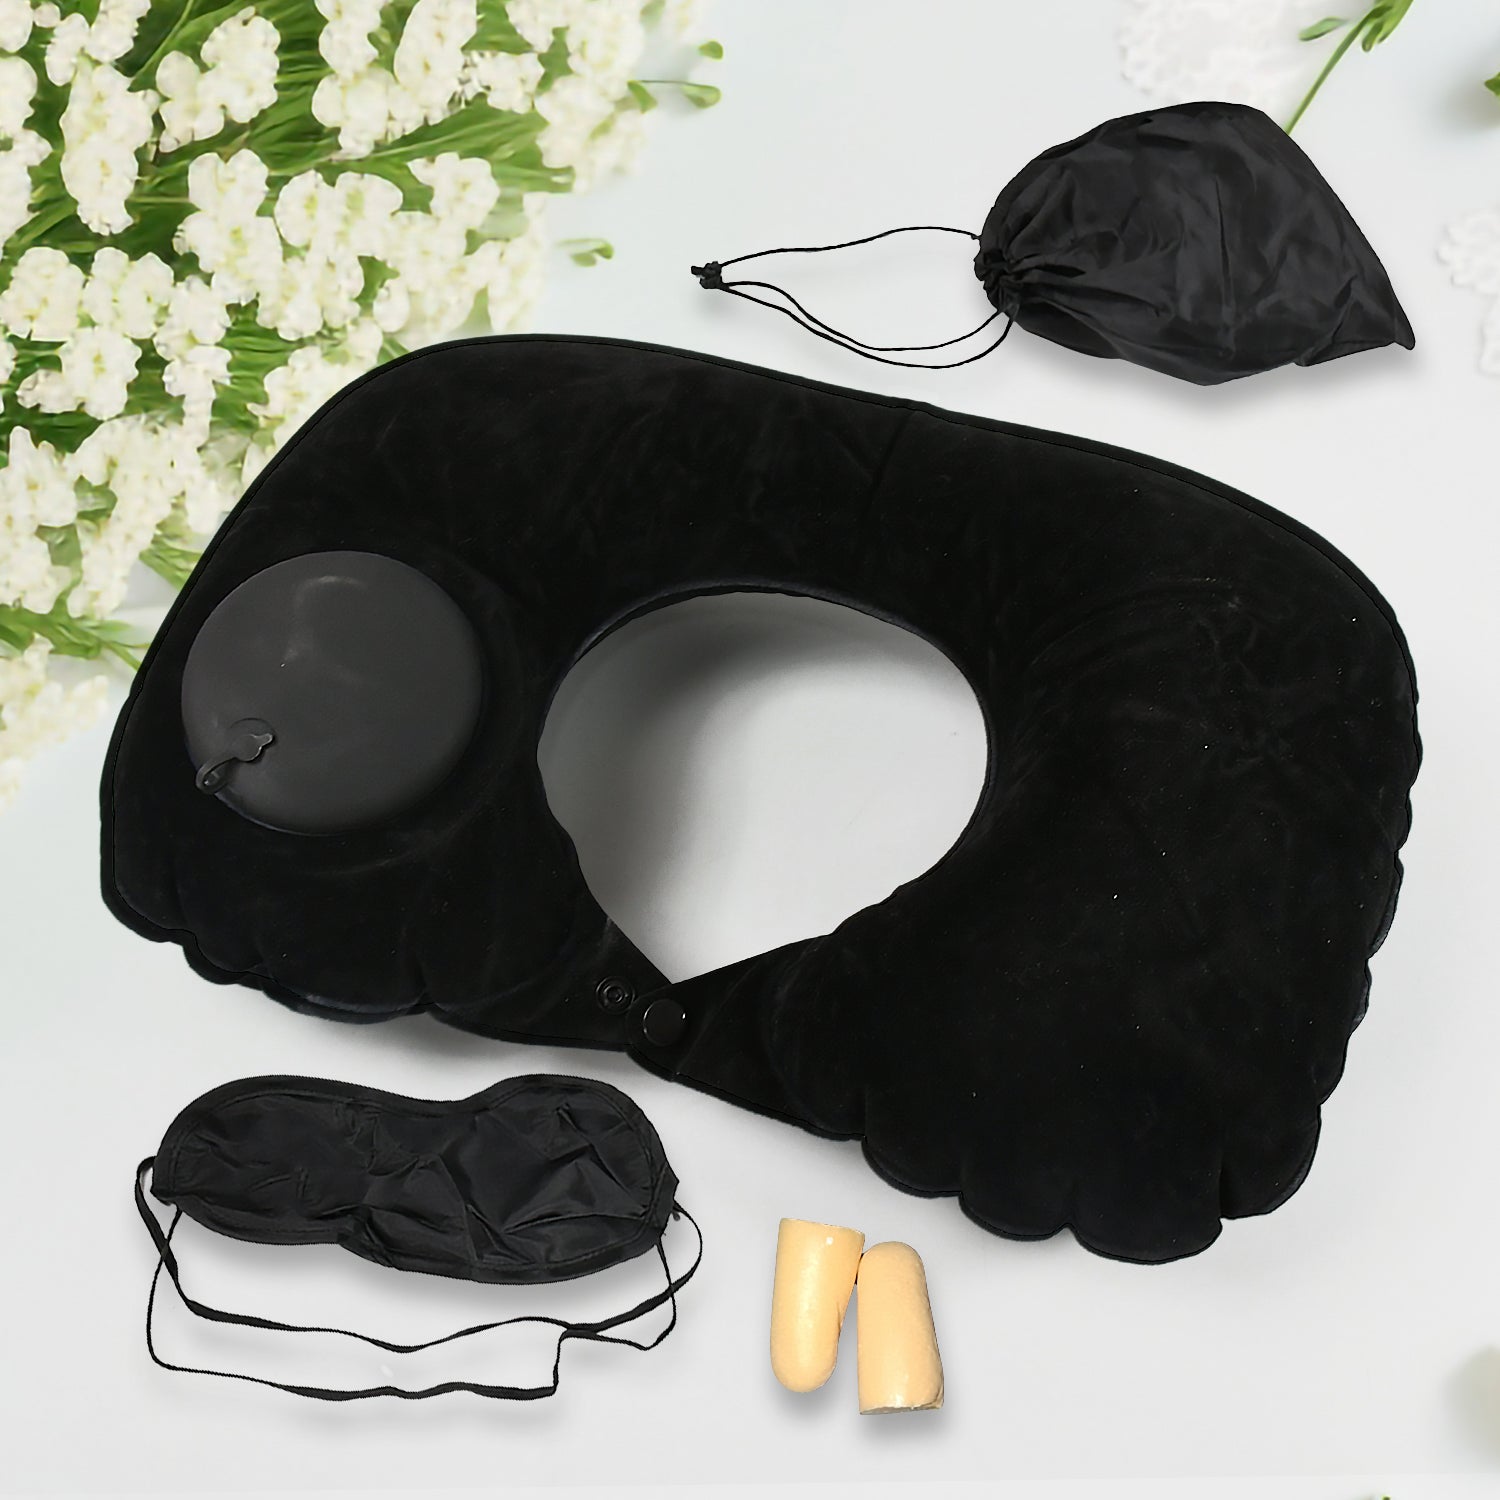 8512 3 in 1 Comfortable Travel Sleeping Kit, Neck Pillow, Eye Mask & Ear Plug Set Inflatable Plane Sleeping Pillow Head Neck Support Pillows for Travel Airplane Office, Black